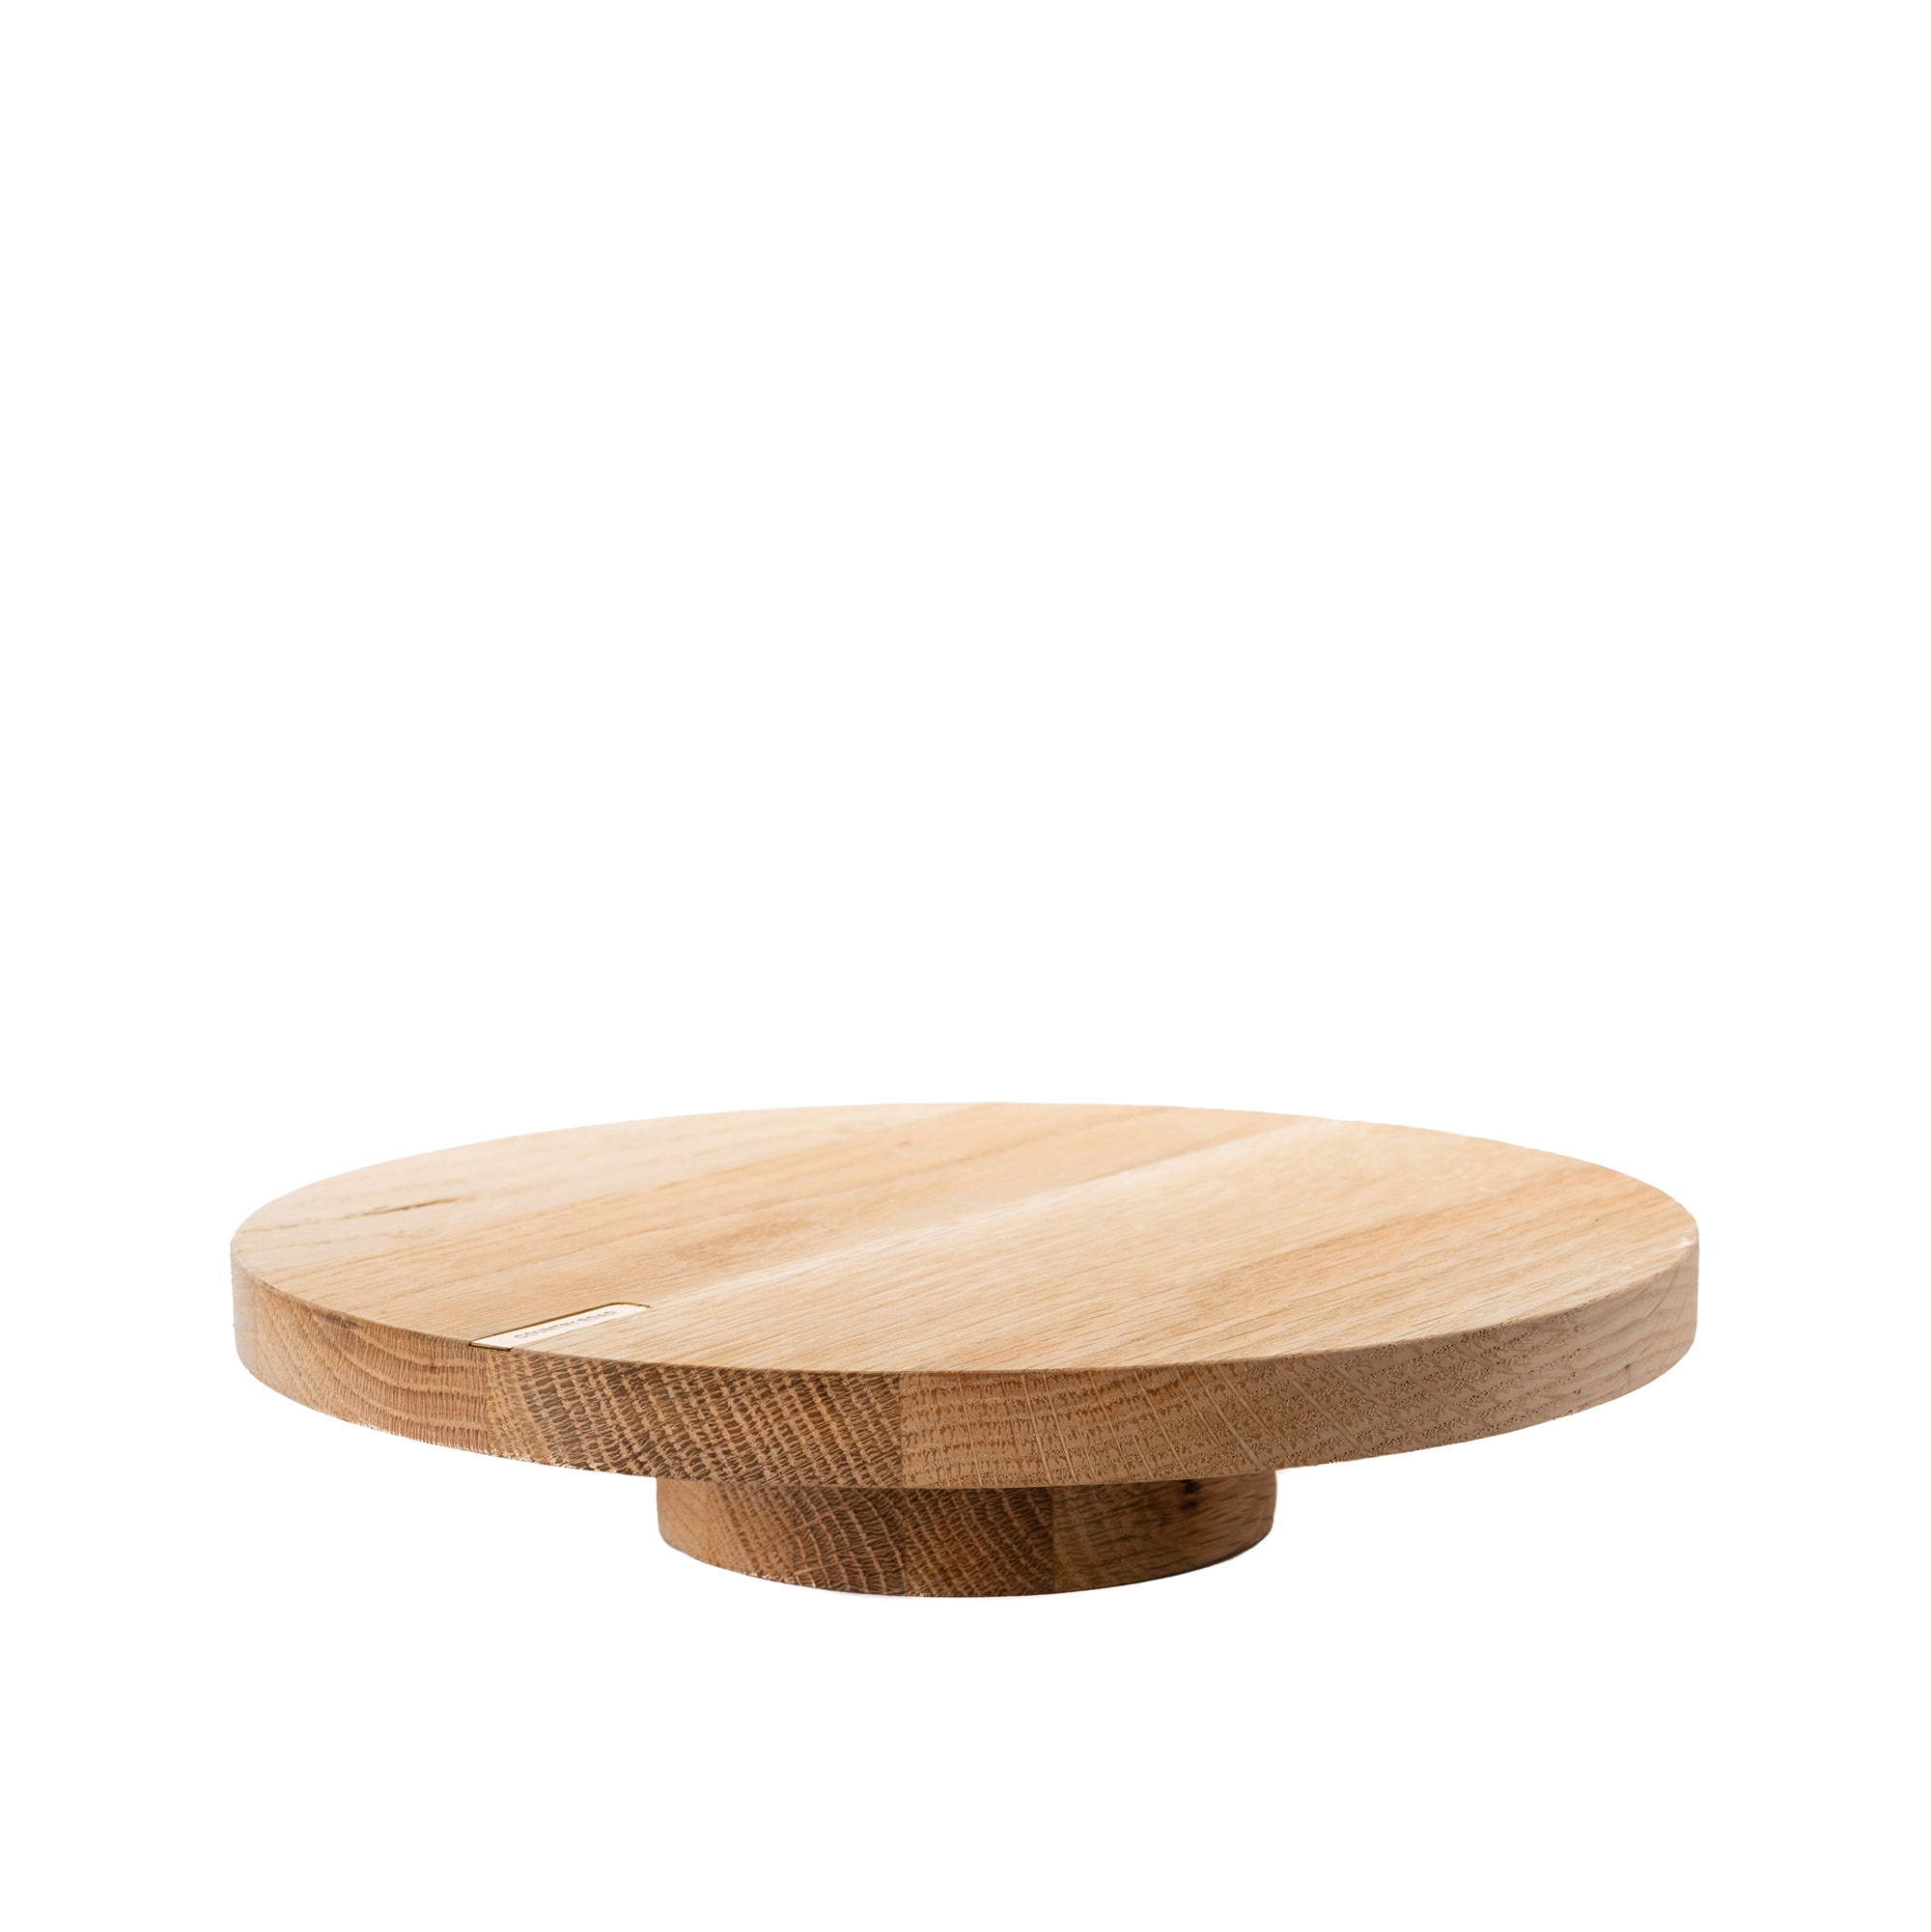 Wooden Cake Stand for Hire | For Love & Living Gold Coast Wedding & Event Hire